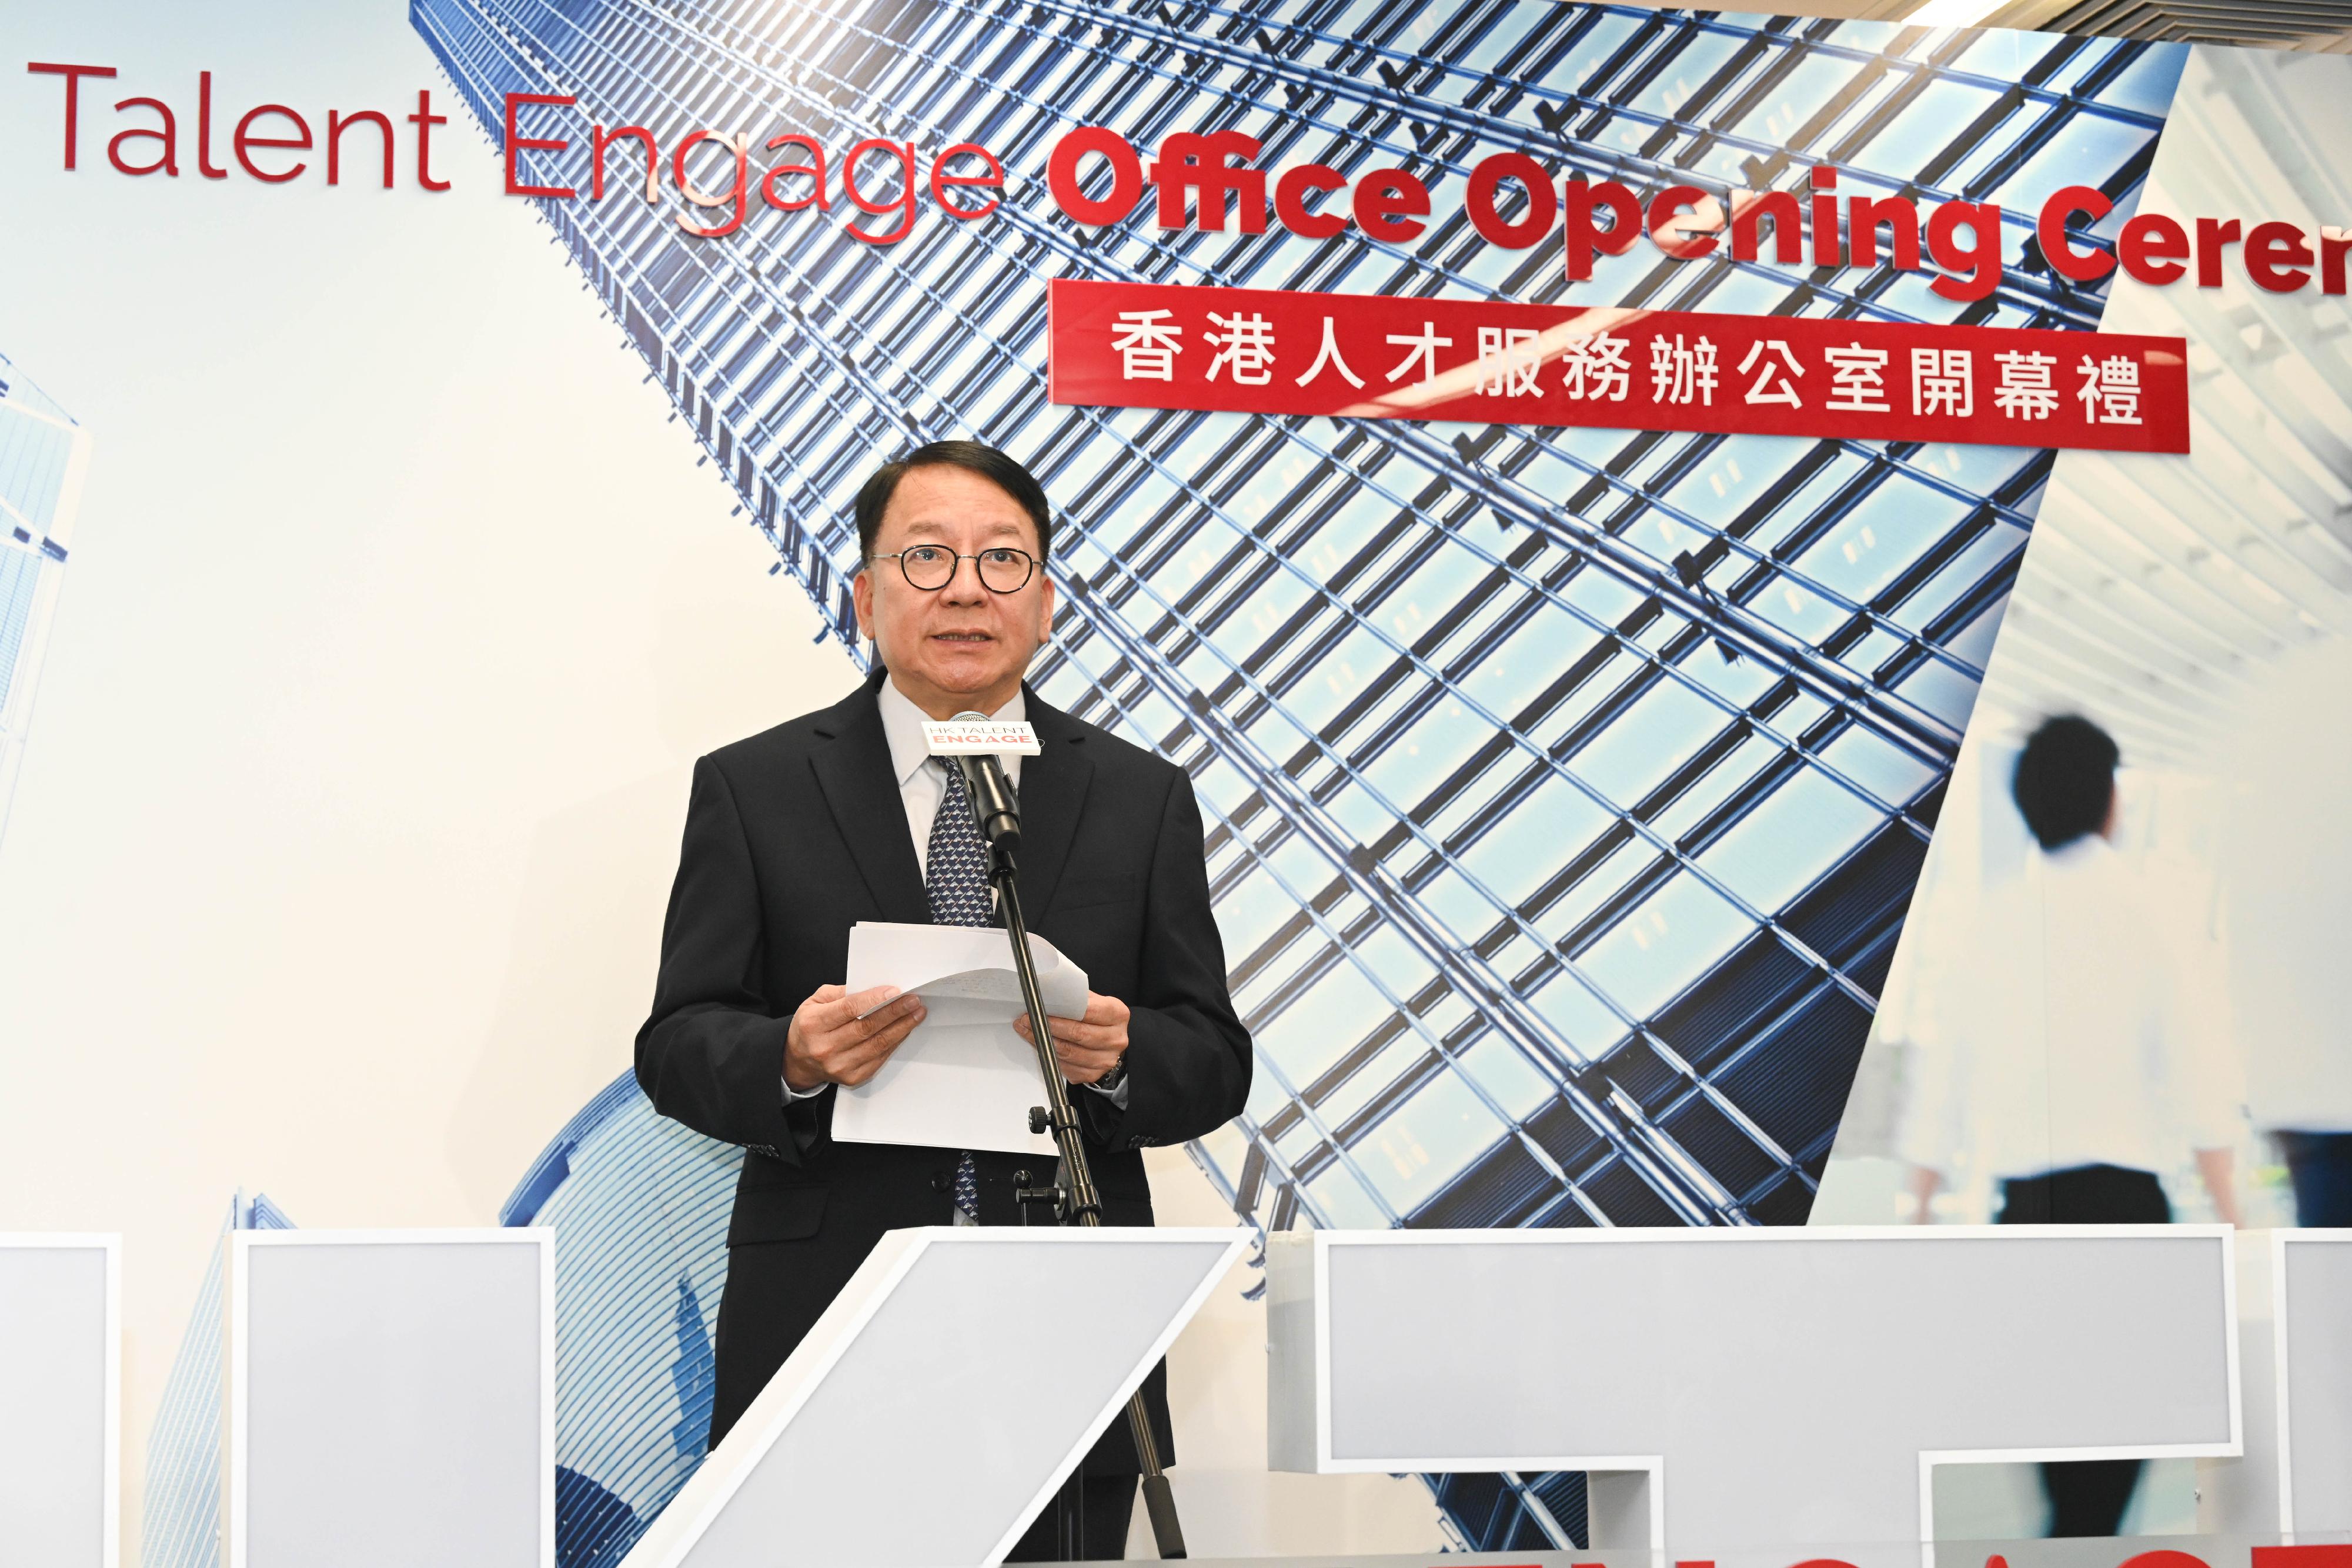 The Chief Secretary for Administration, Mr Chan Kwok-ki, today (October 30) officiated at the Hong Kong Talent Engage Office Opening Ceremony. Photo shows Mr Chan addressing the opening ceremony.